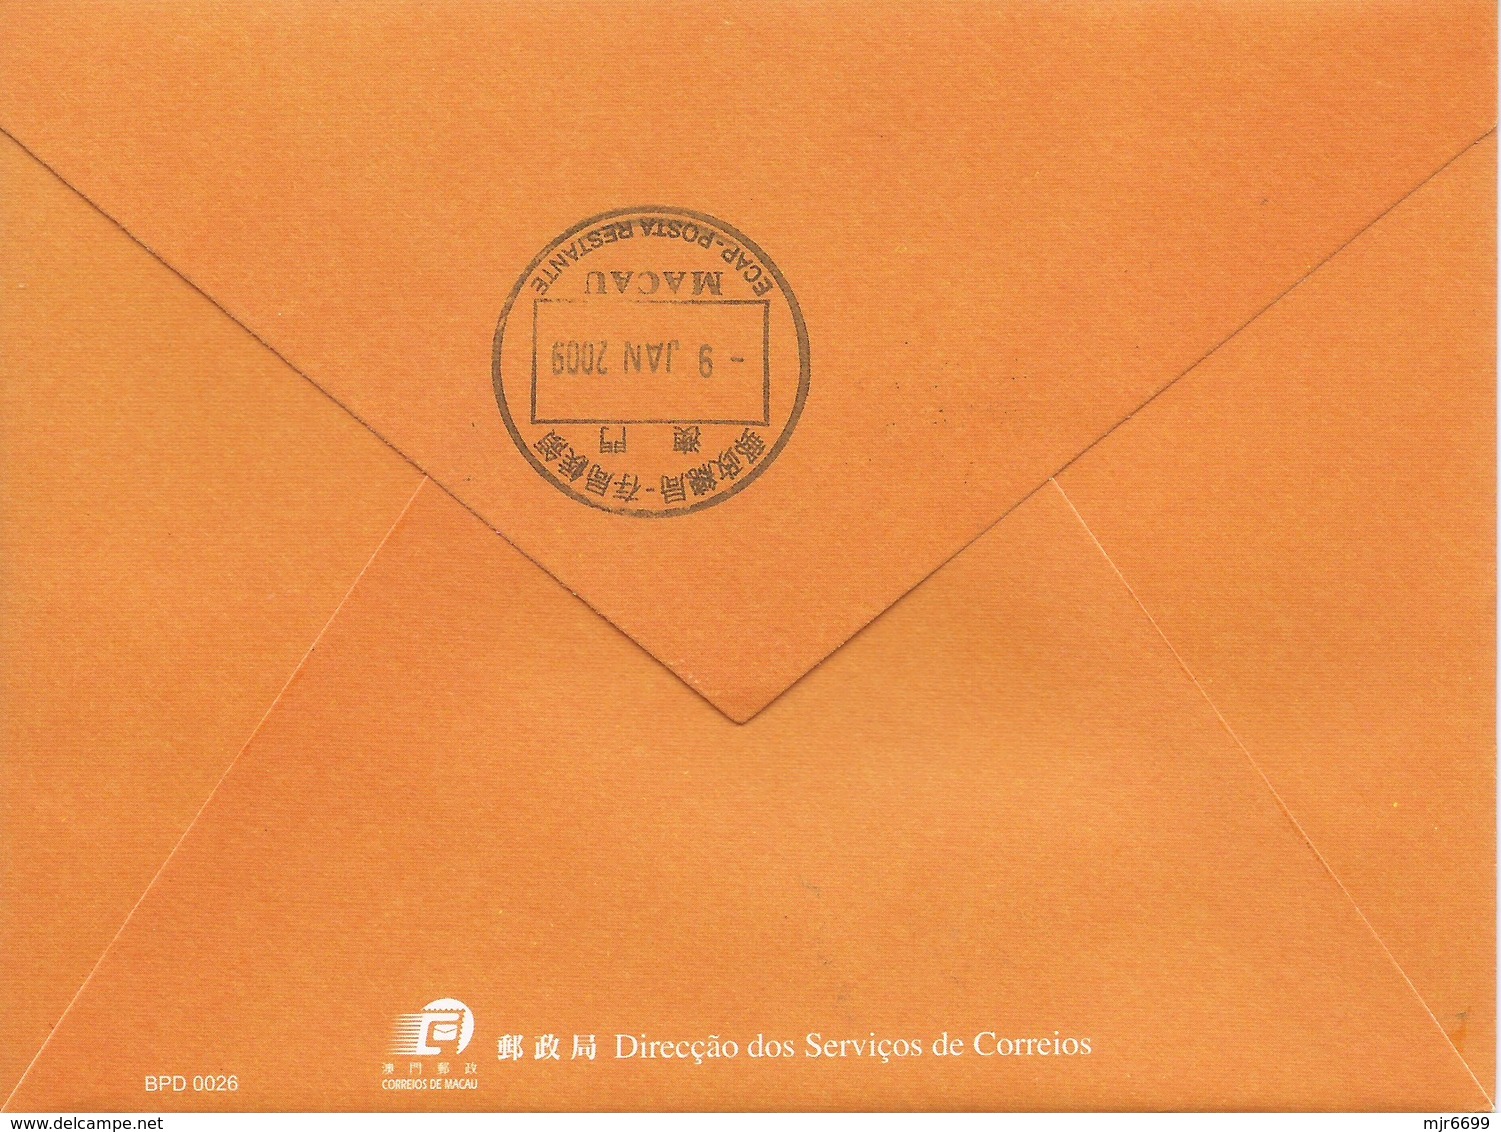 MACAU 2009 LUNAR YEAR OF THE OX GREETING CARD & POSTAGE PAID COVER FIRST DAY USAGE - Ganzsachen